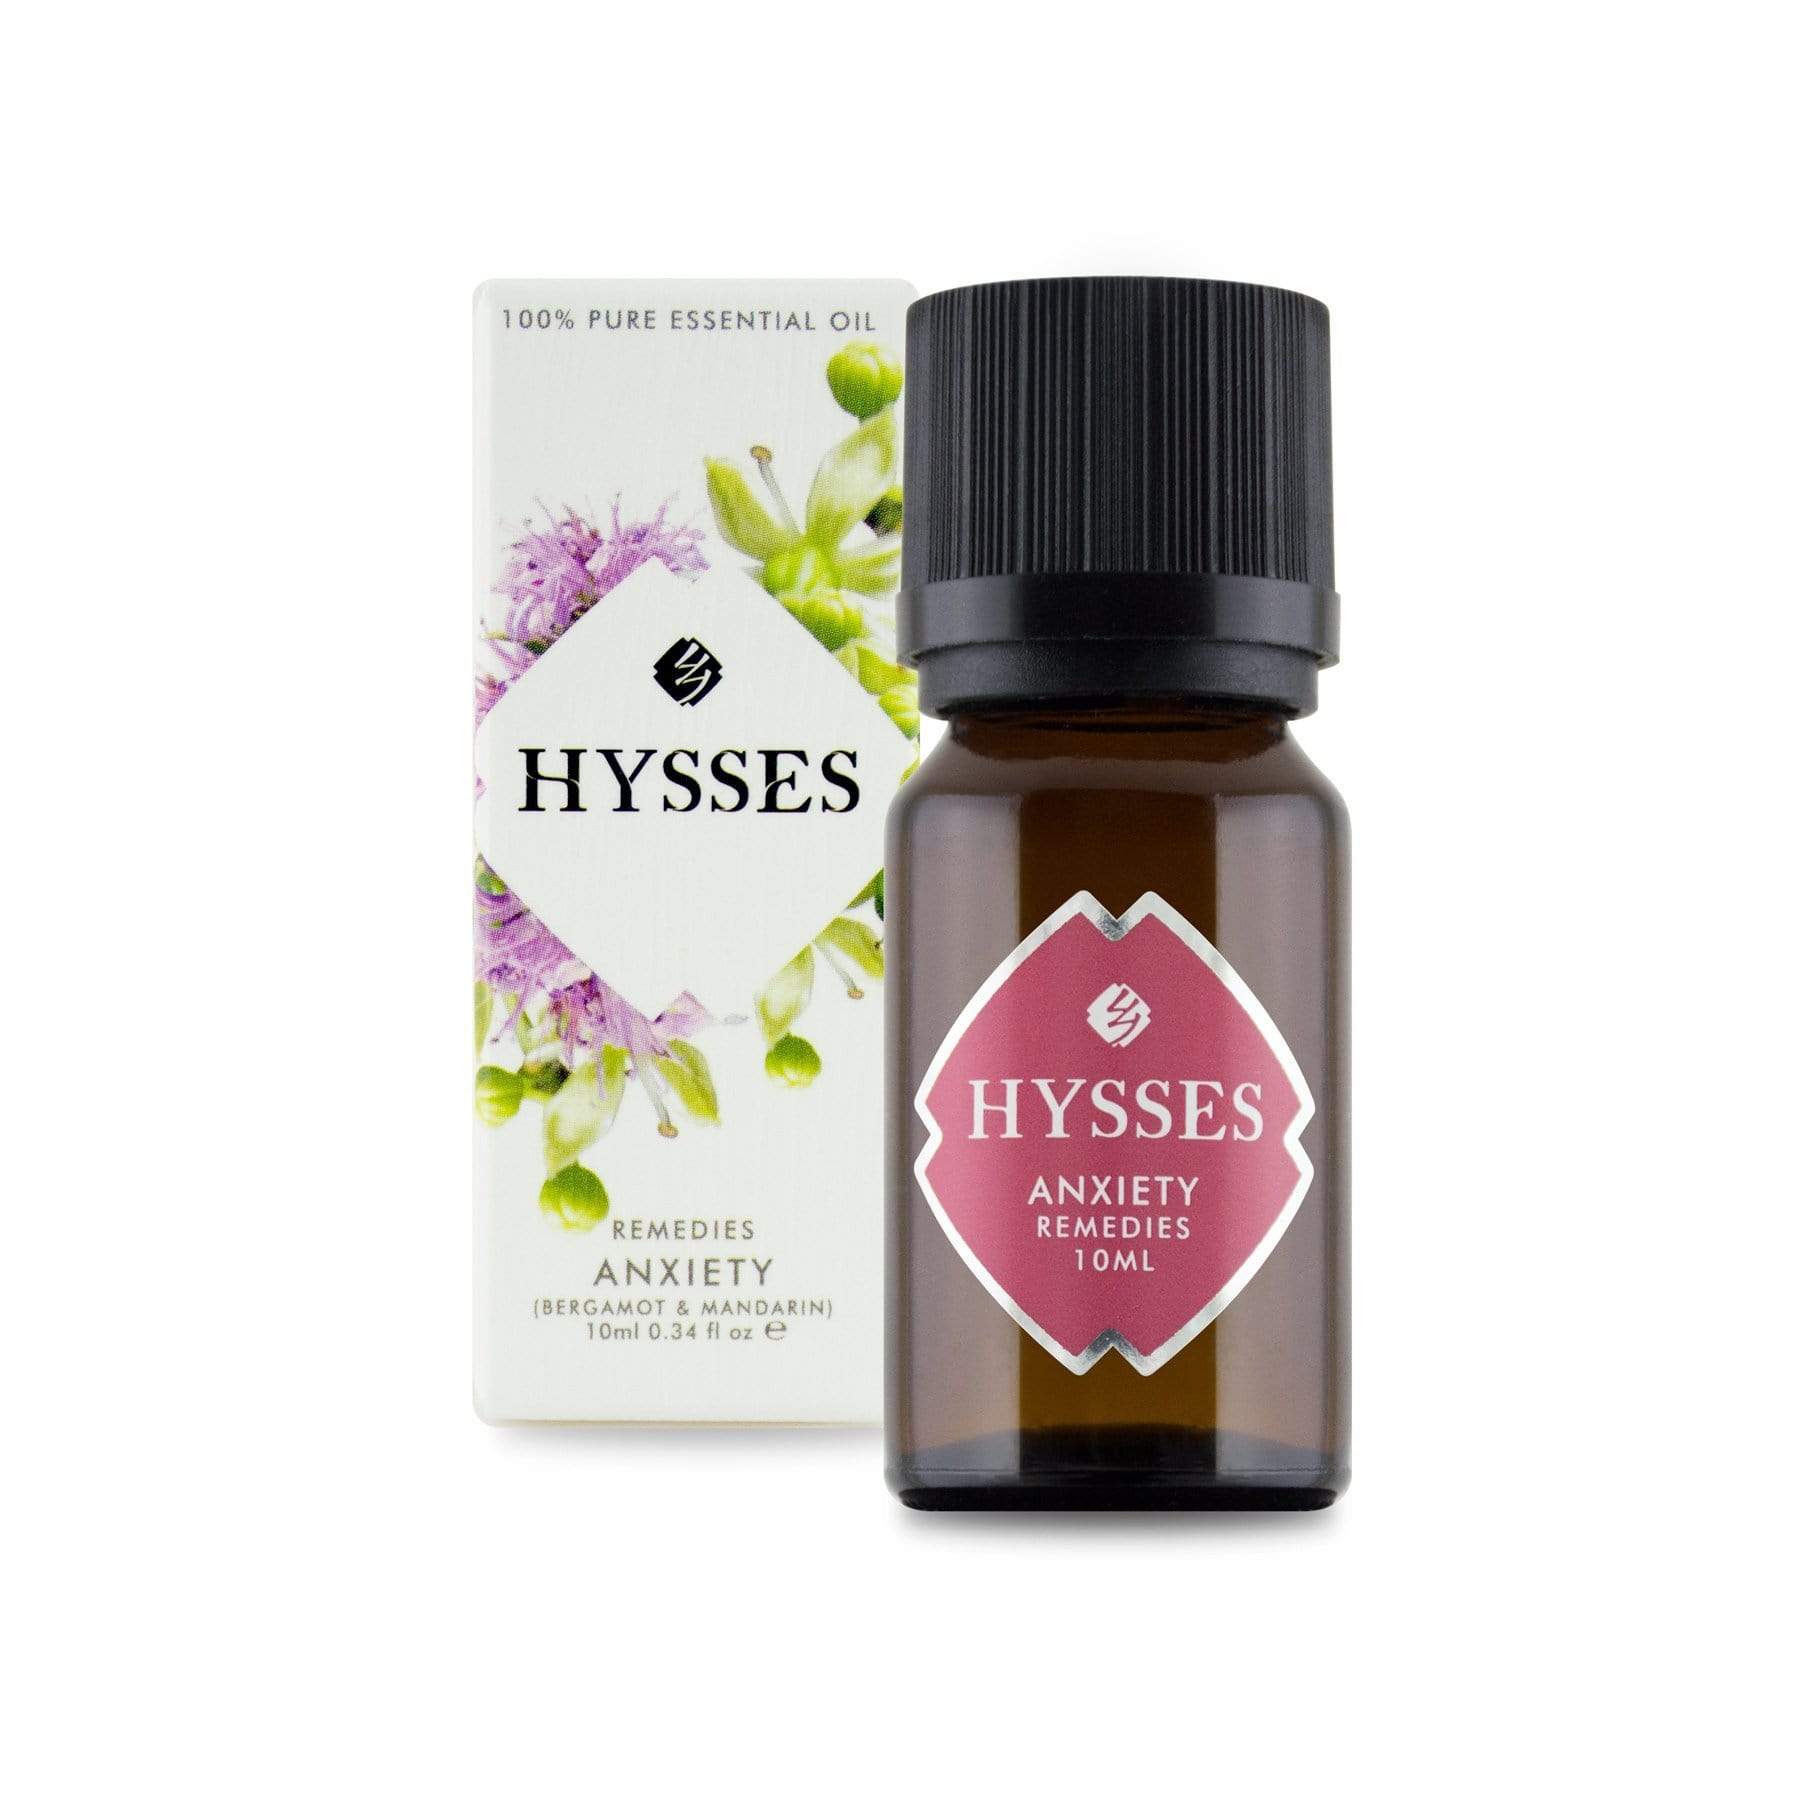 Hysses Essential Oil Remedies Anxiety, 10ml